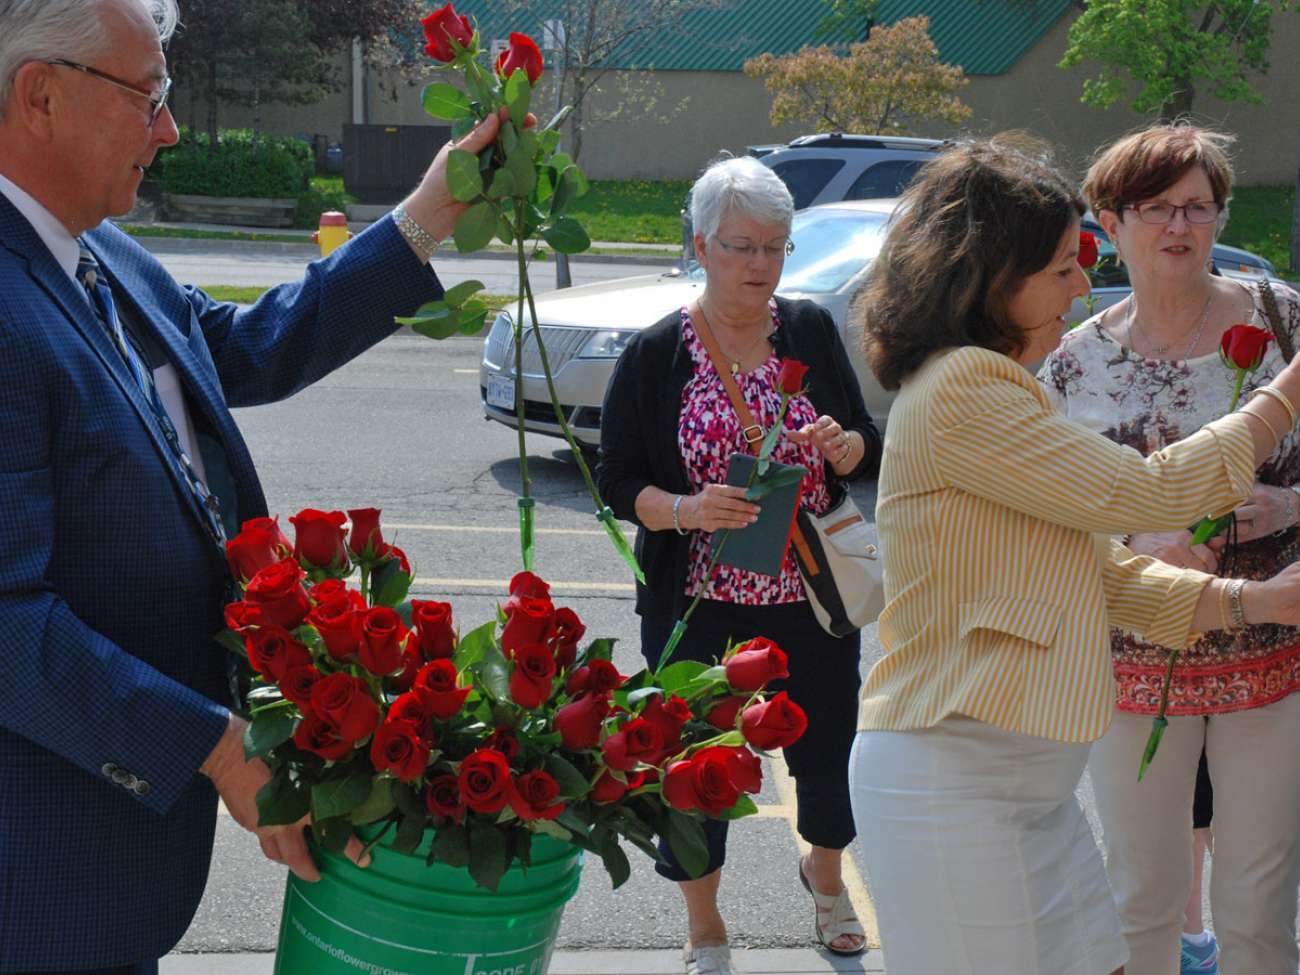 Malcolm Maxwell and Judy Linton provide roses to each of the tour participants